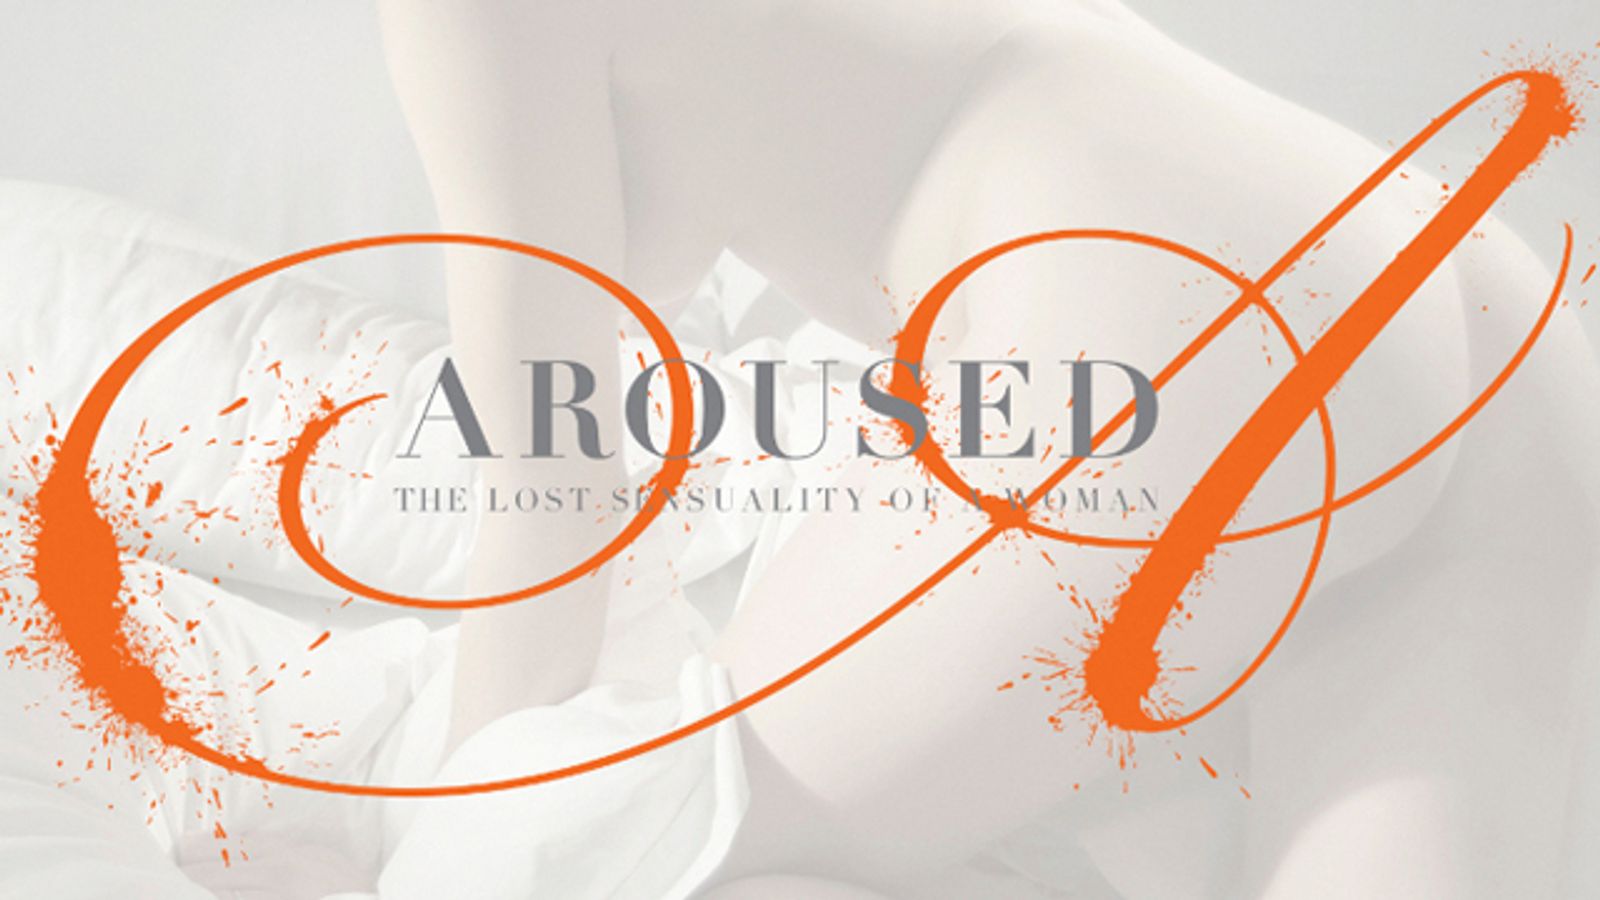 Deborah Anderson Finds Porn Stars’ Lost Sensuality in ‘Aroused’ Project